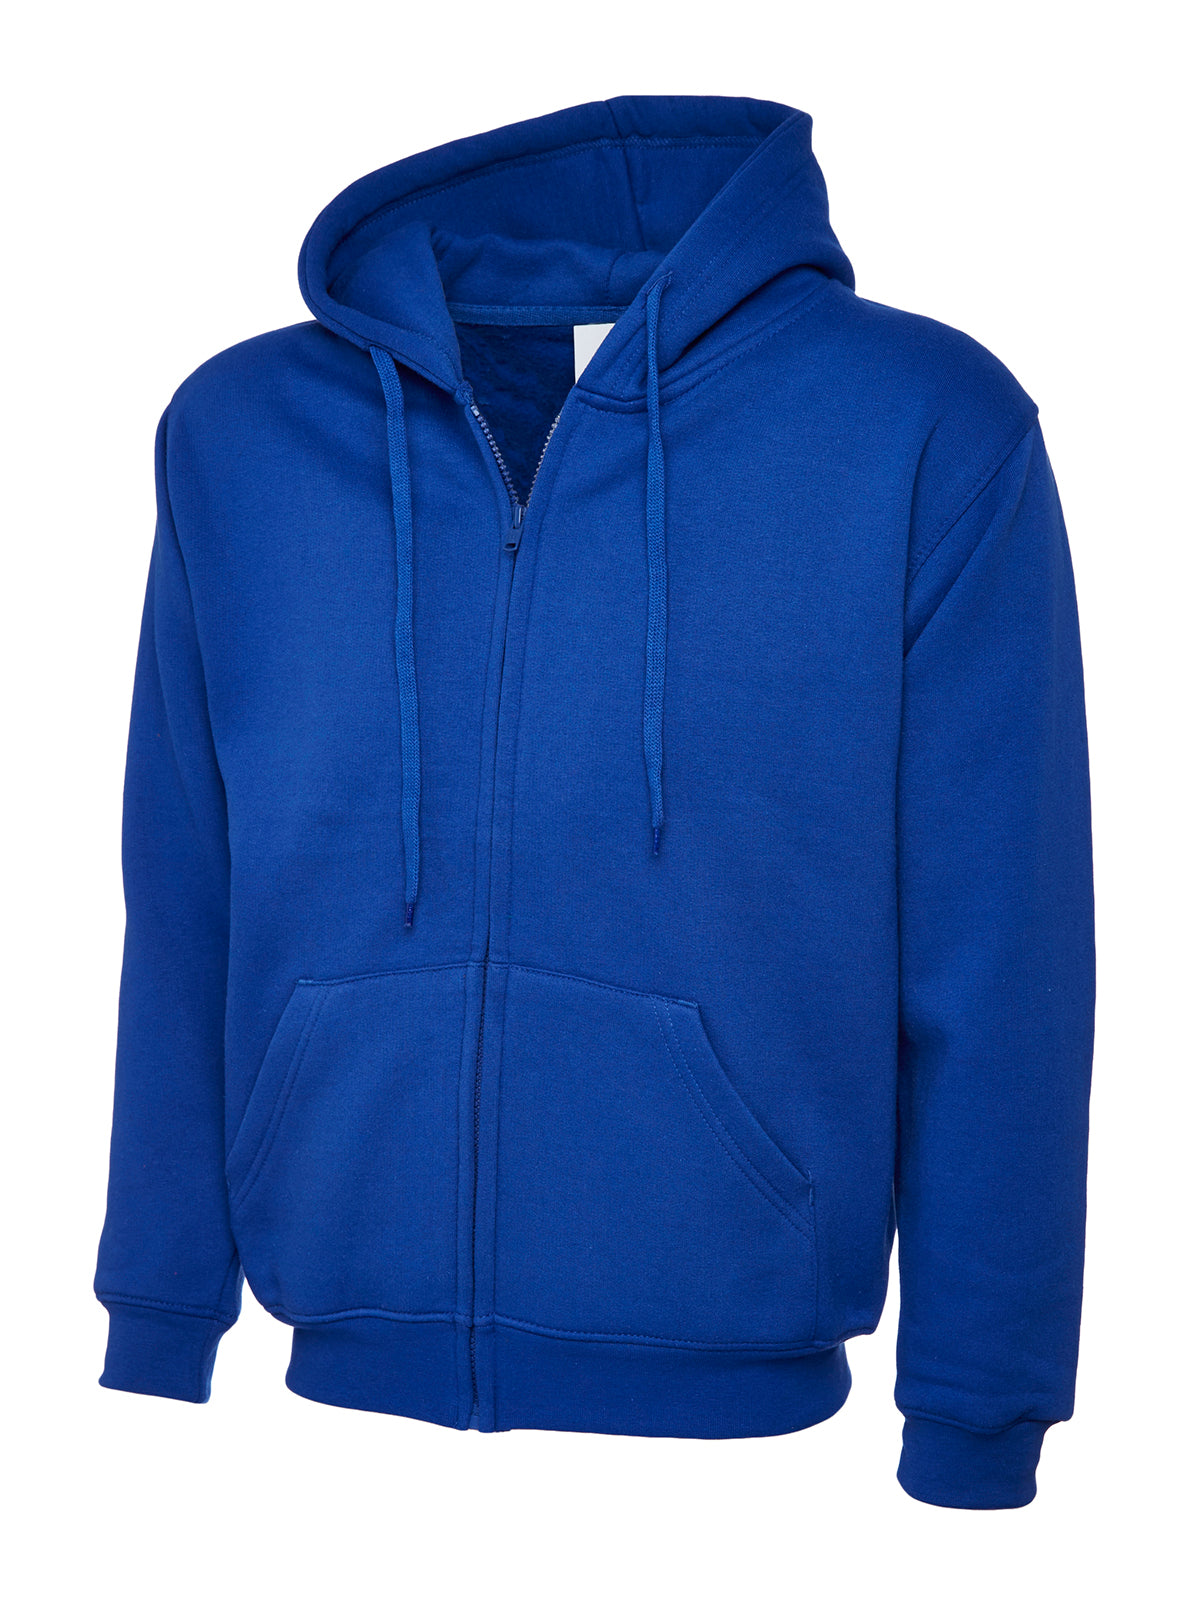 Royal Blue Hooded Zip Sweatshirt with Little Sunshines embroidery